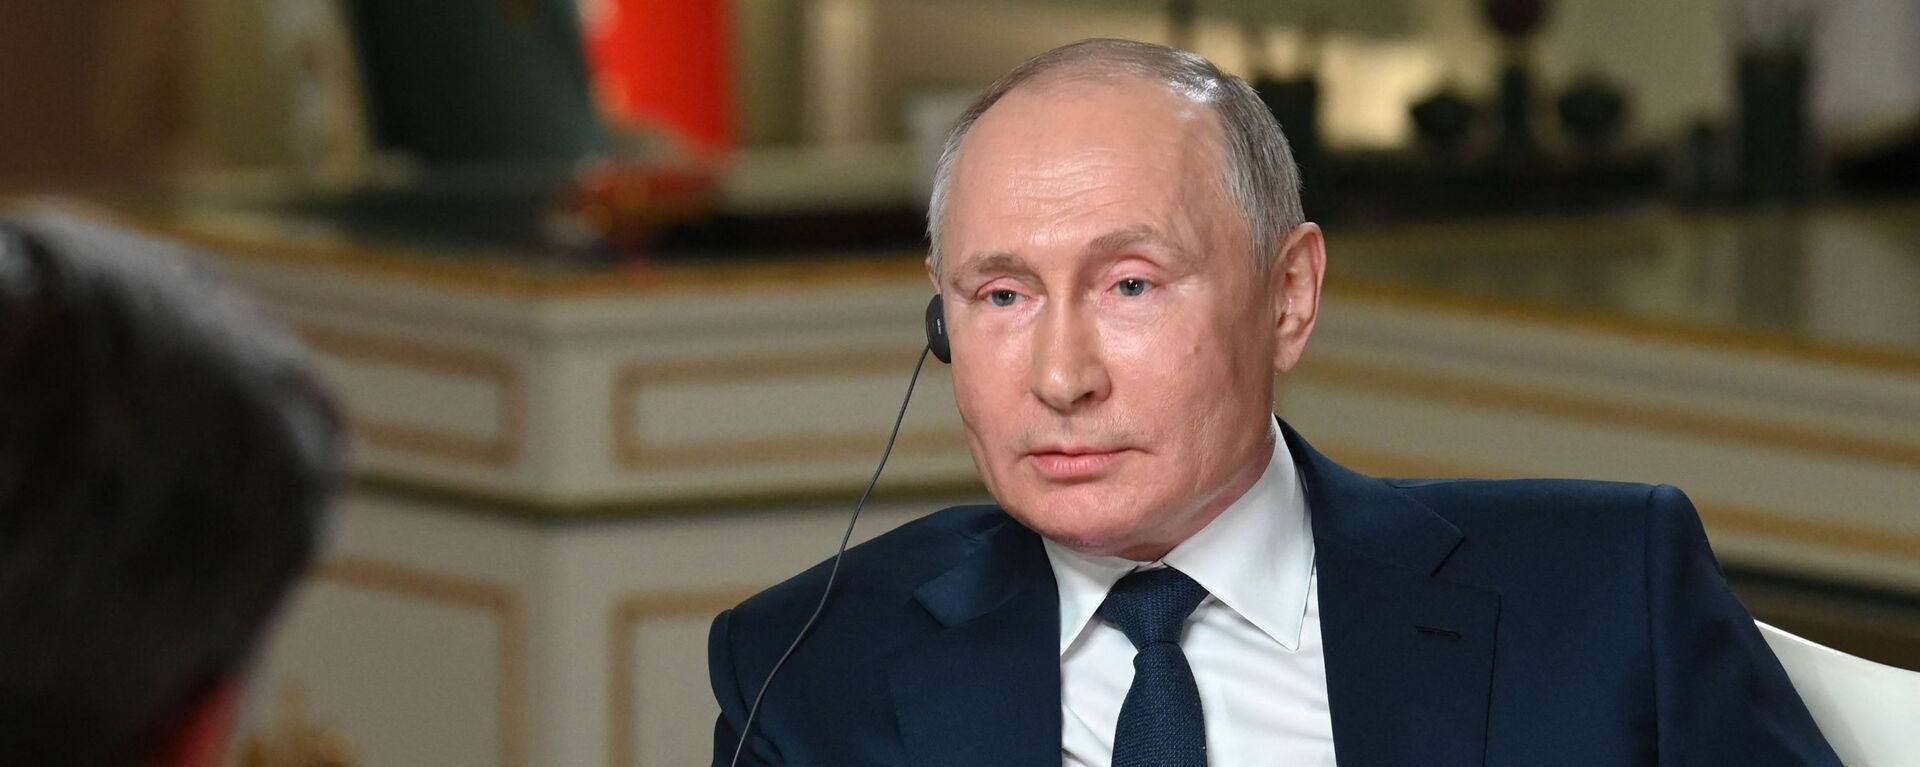 Russia's President Vladimir Putin (R) speaks with journalist of NBC News Keir Simmons in Moscow on June 11, 2021, during an exclusive interview ahead of a meeting with US President. - Sputnik International, 1920, 22.06.2021